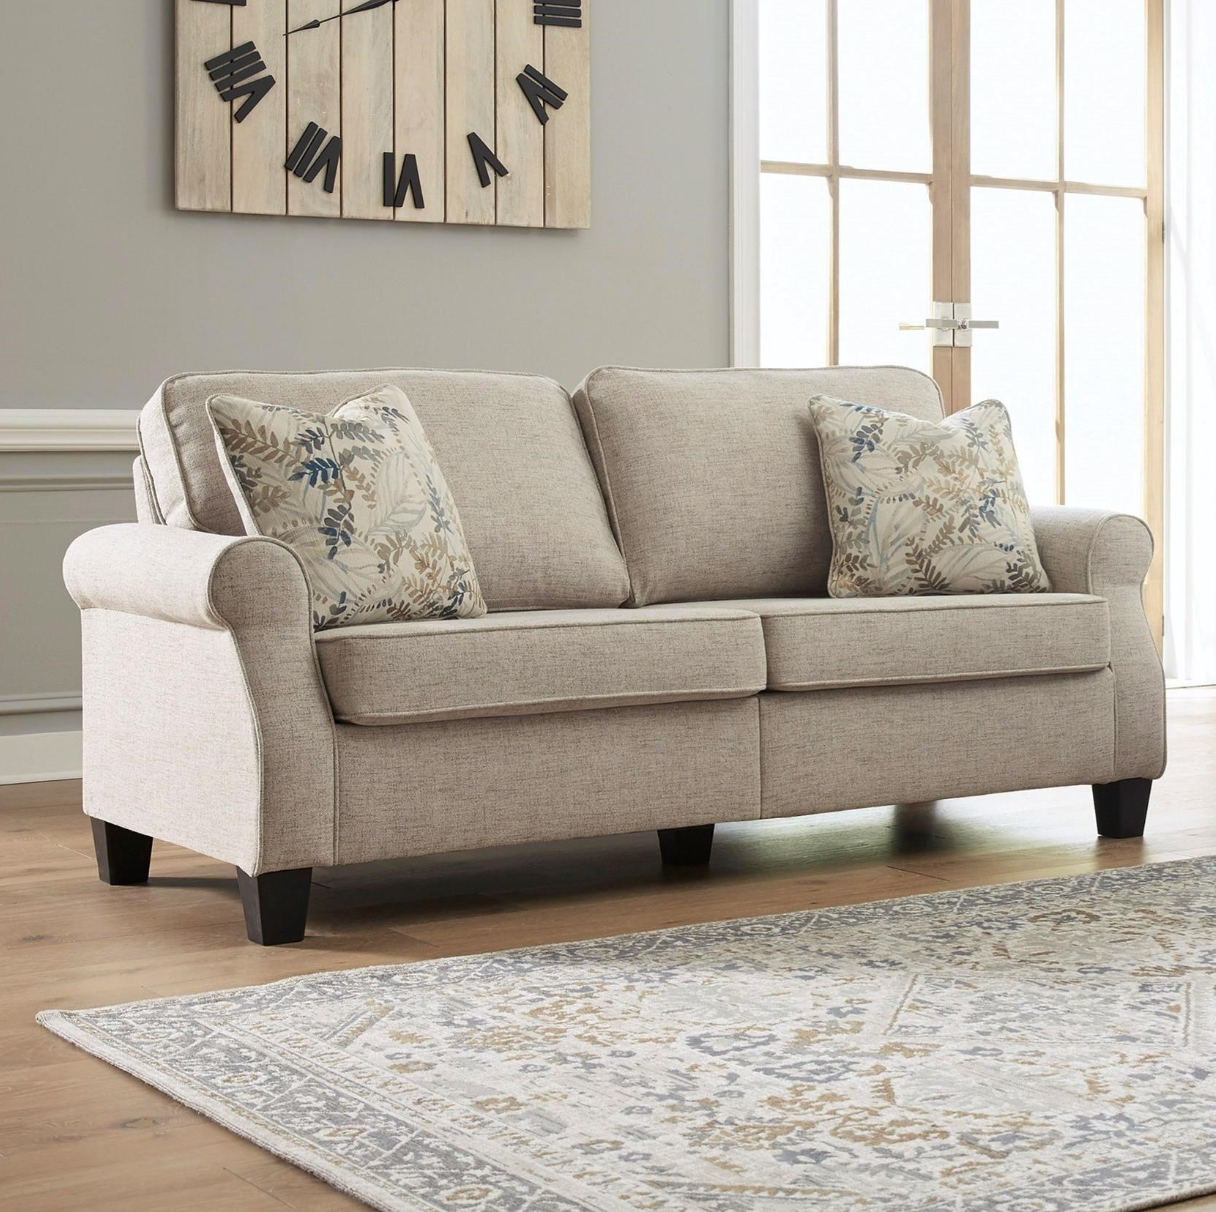 WEEKLY or MONTHLY. Alishoo Sesame Couch and Loveseat